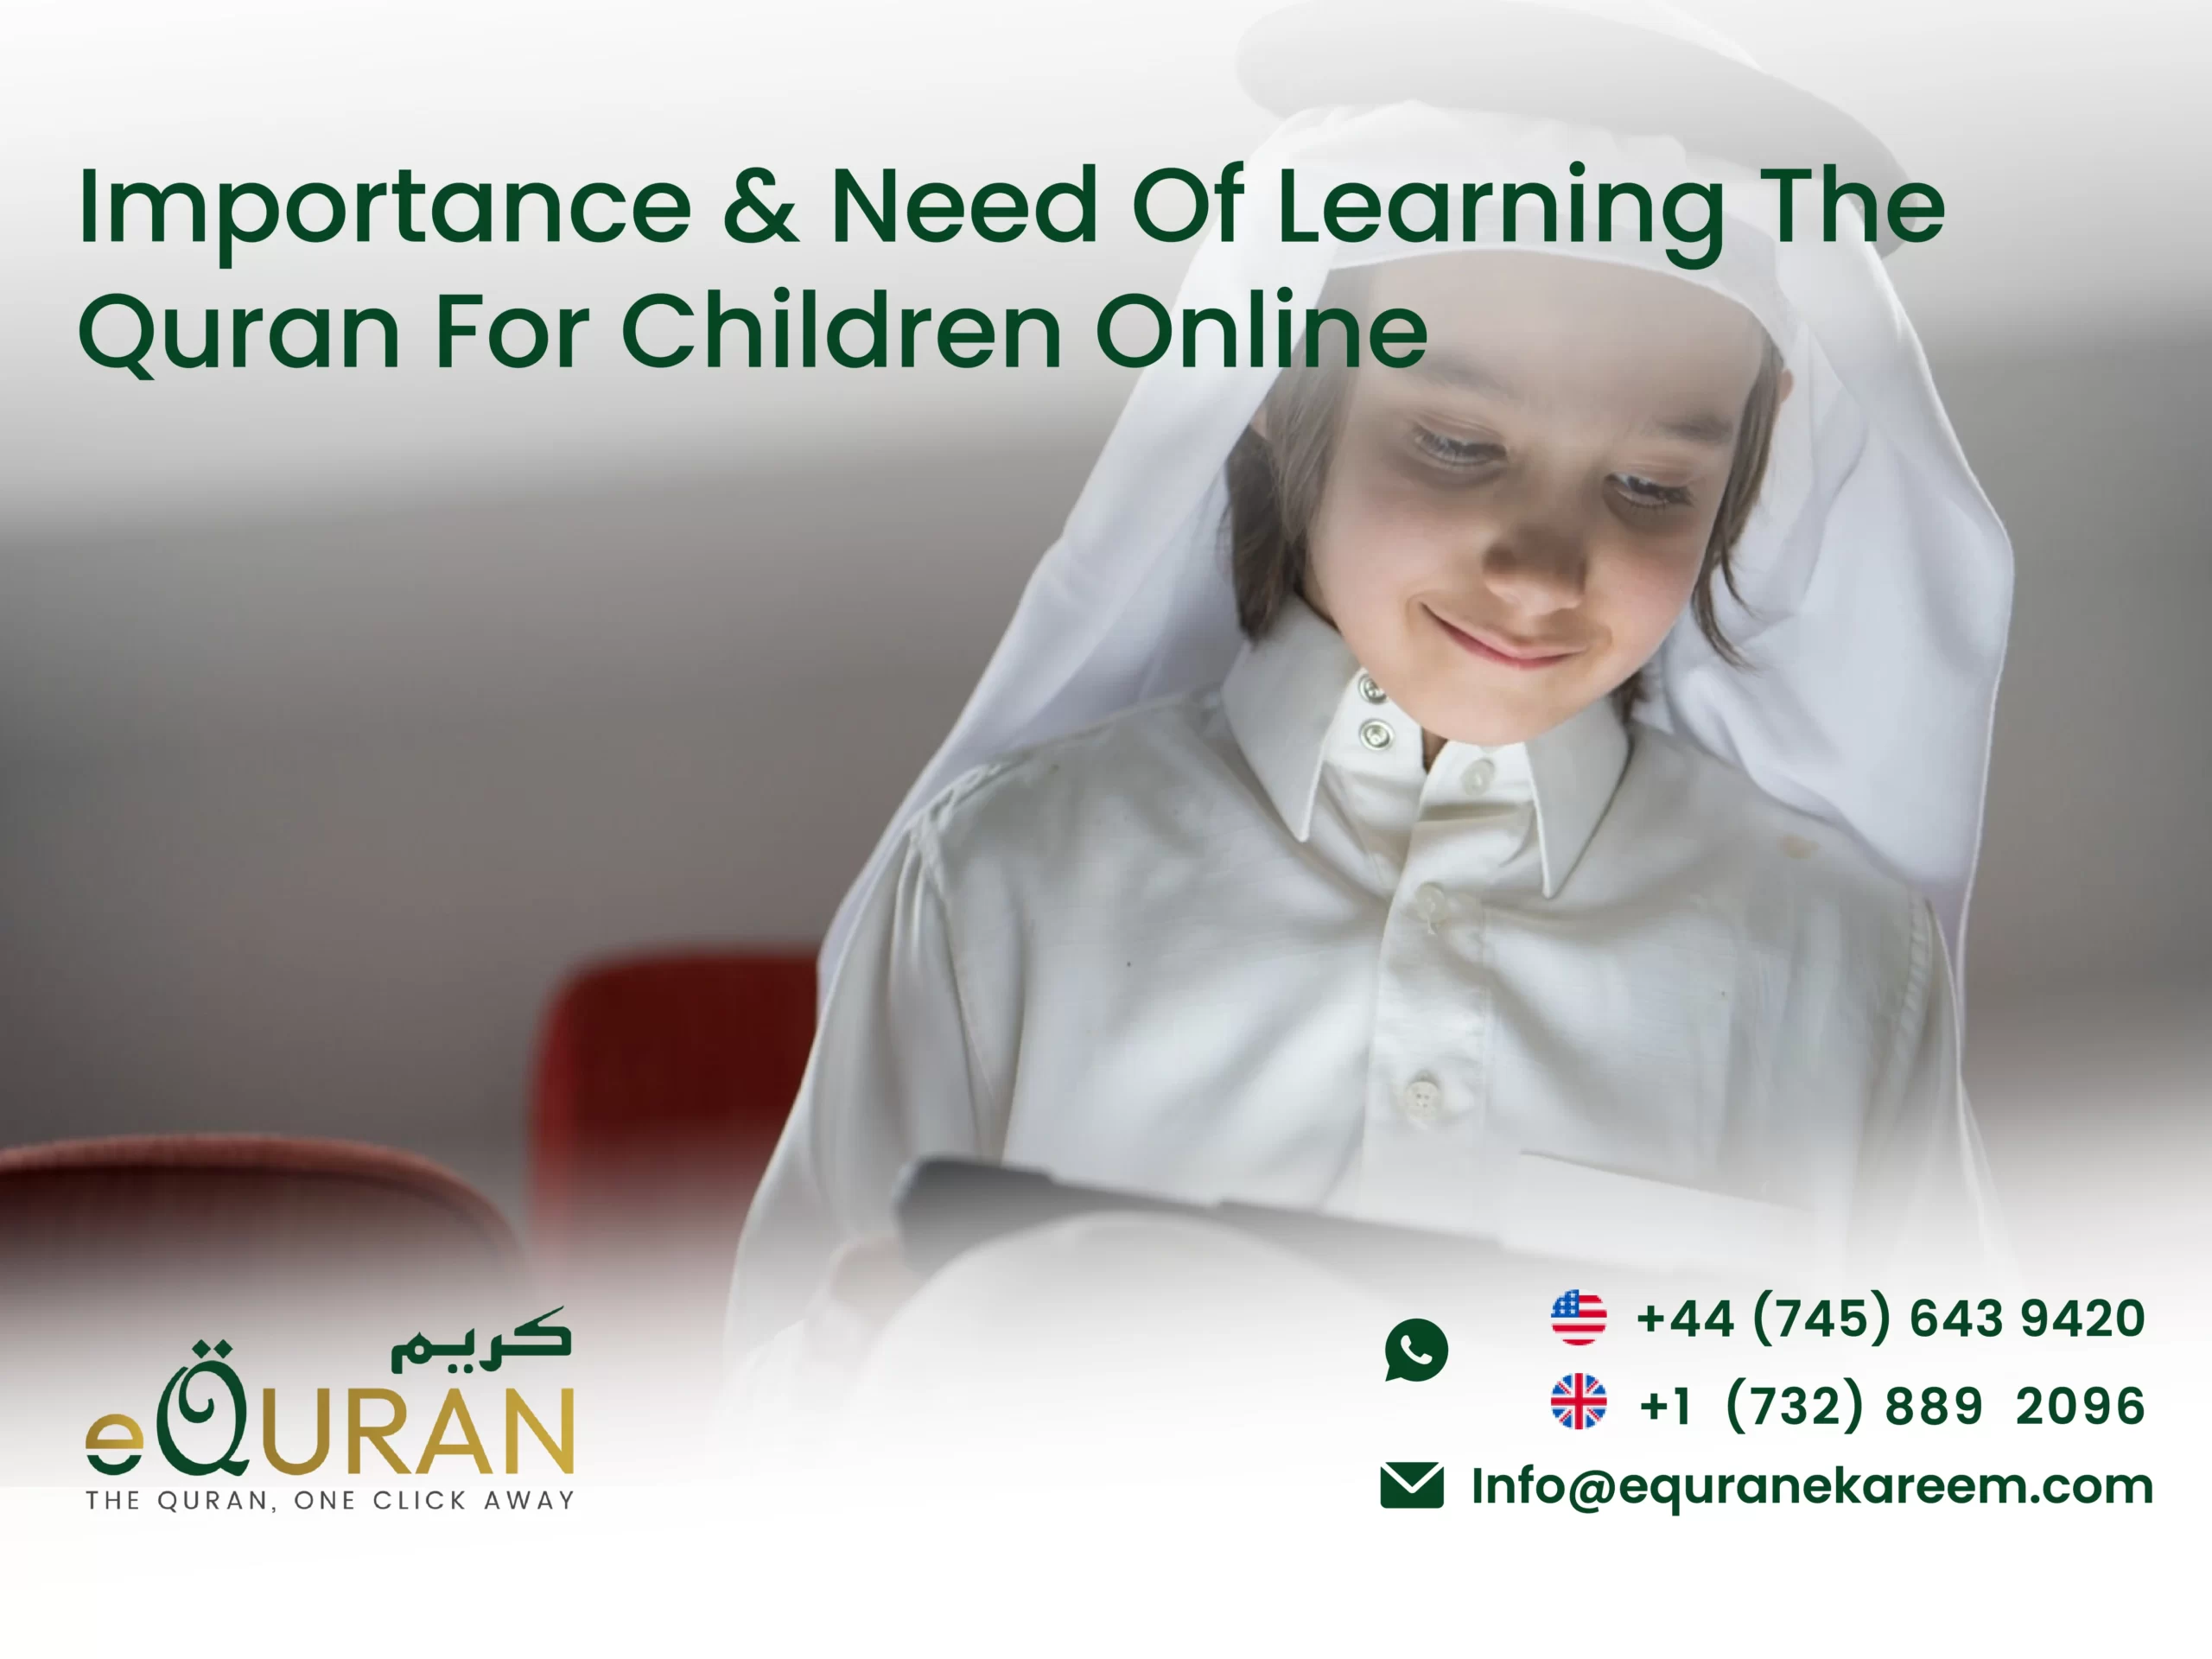 Importance And Need Of Learning The Quran by eQuranekareem online Quran Academy